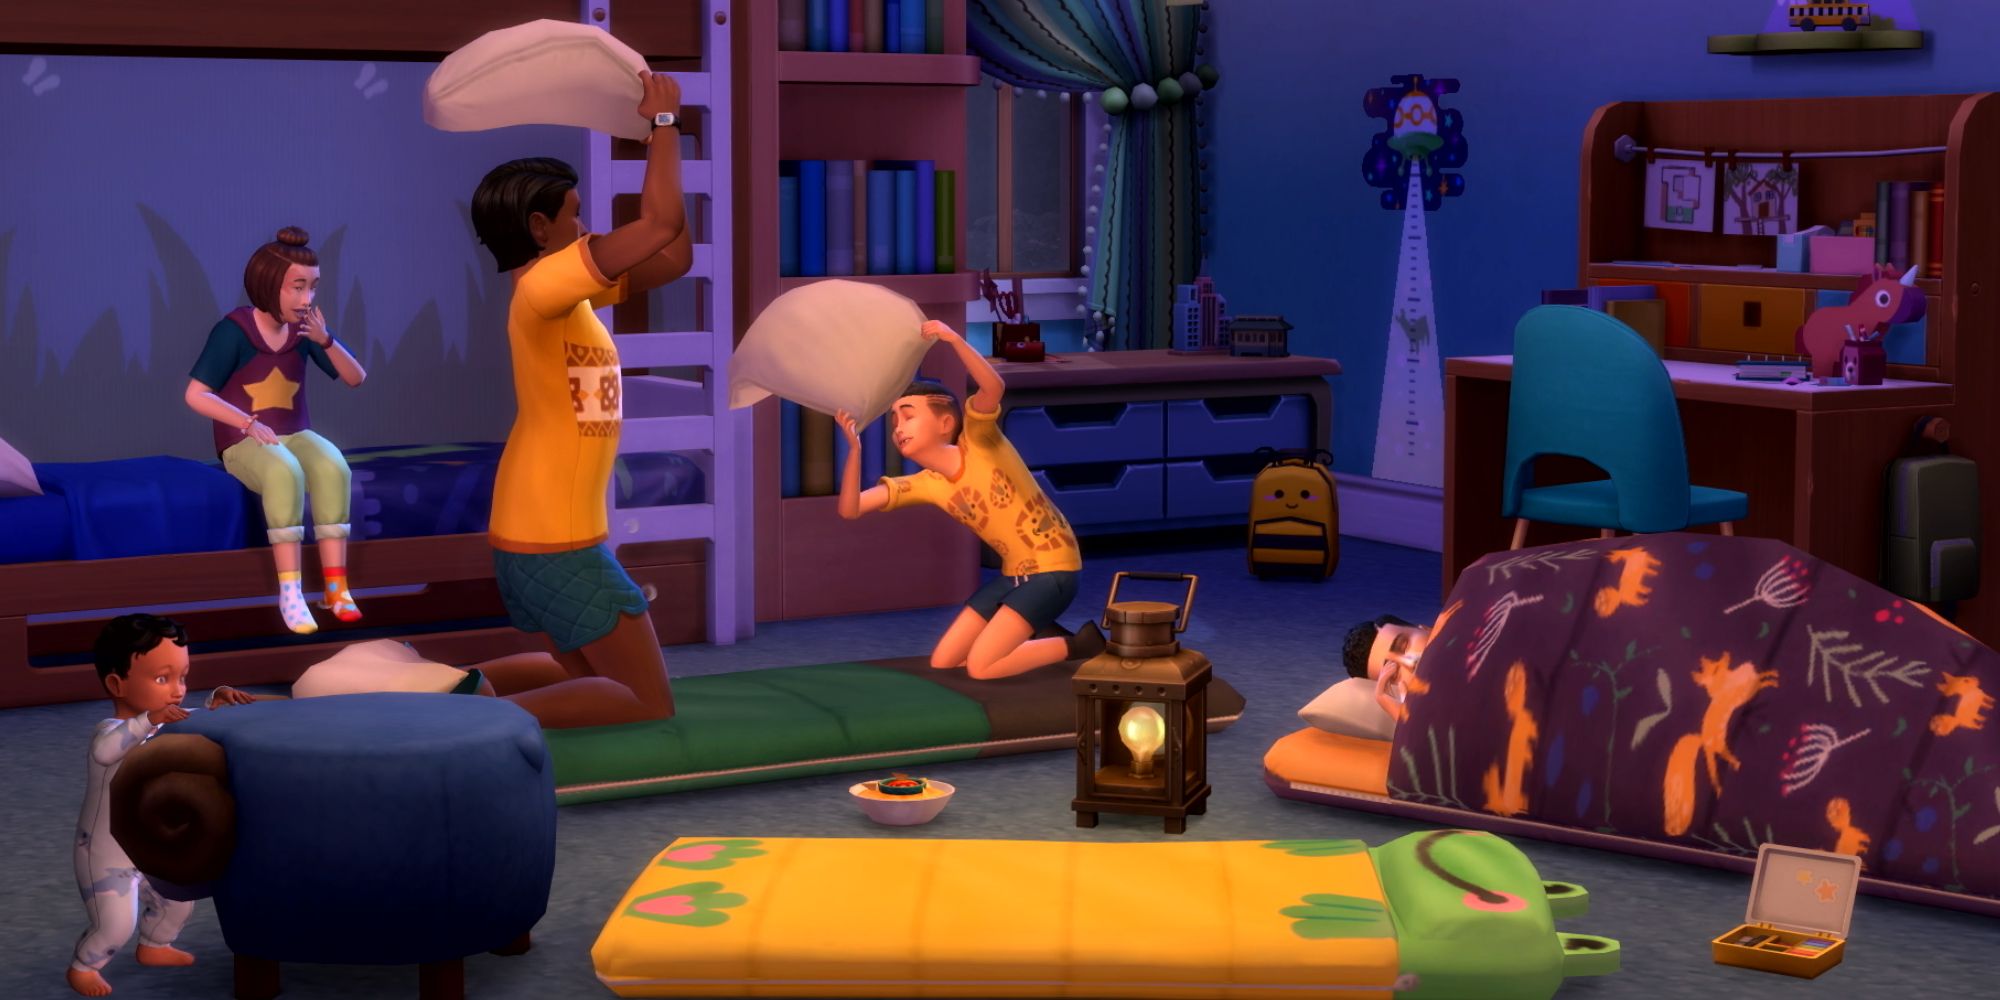 Sims 4 Growing Together sleepover with sleeping bags and children of all ages